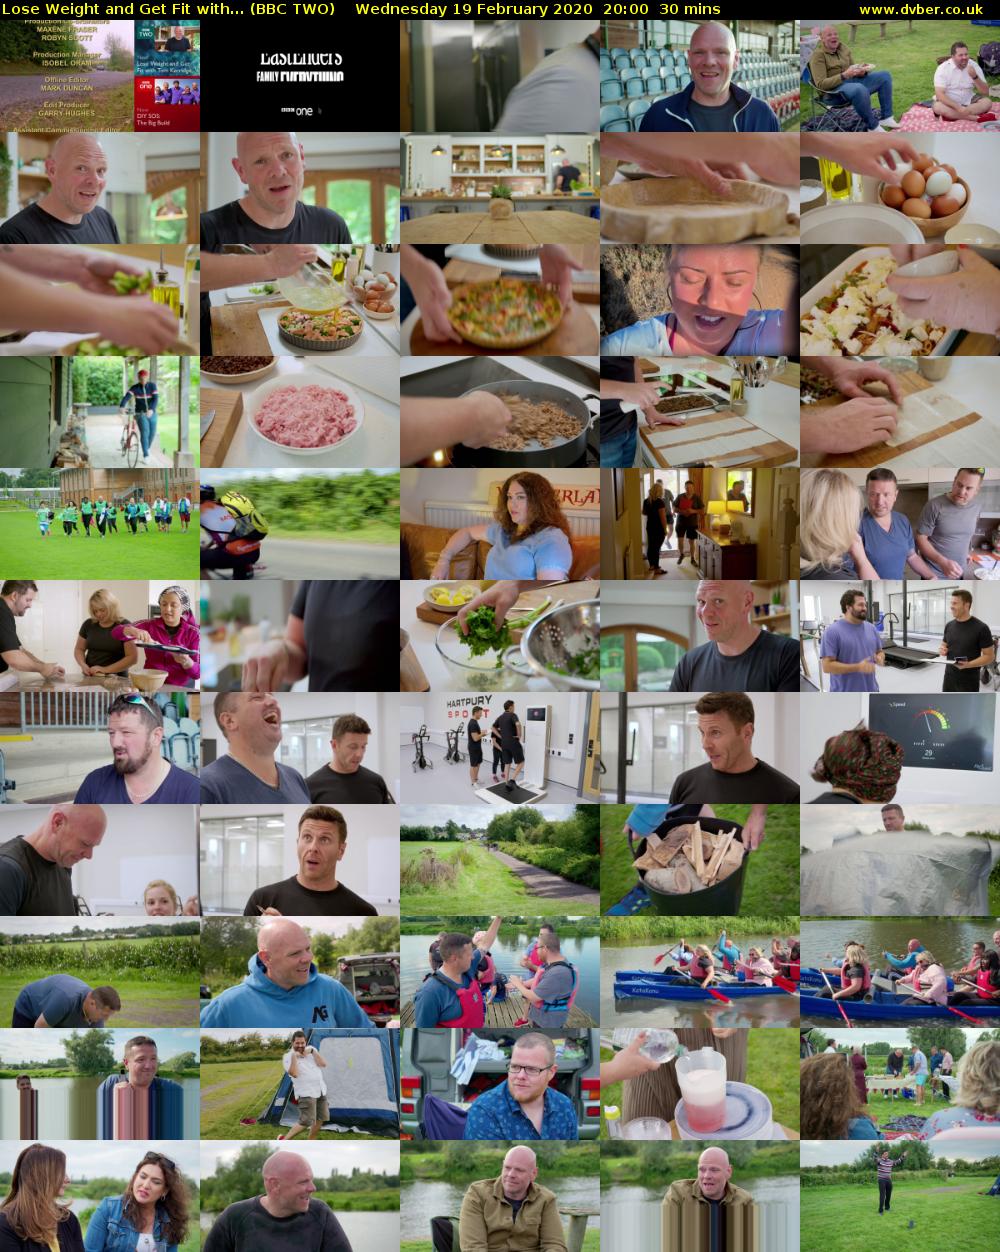 Lose Weight and Get Fit with... (BBC TWO) Wednesday 19 February 2020 20:00 - 20:30